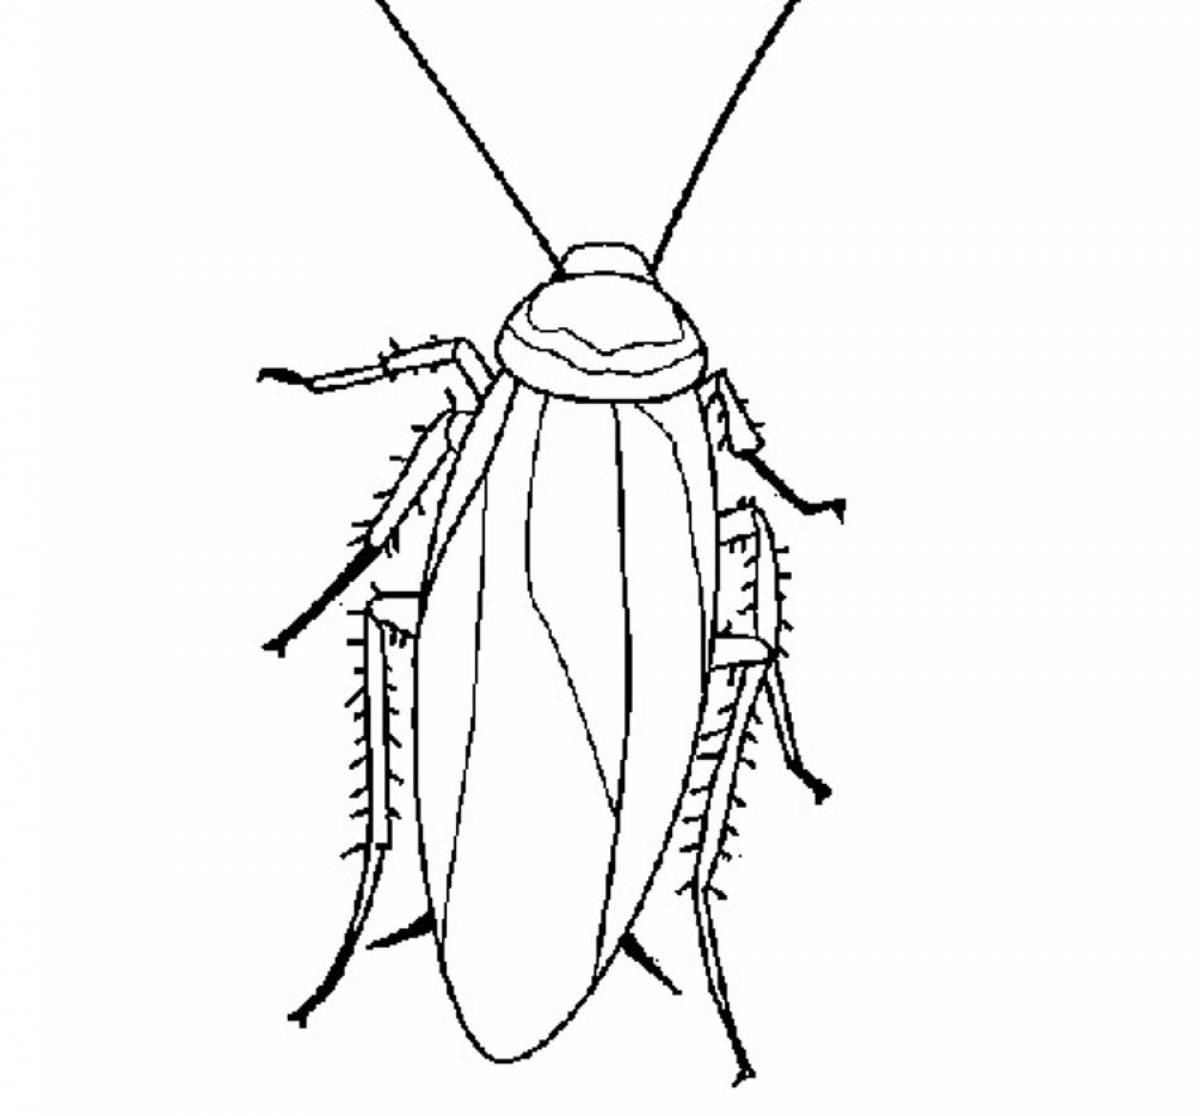 Red cockroach